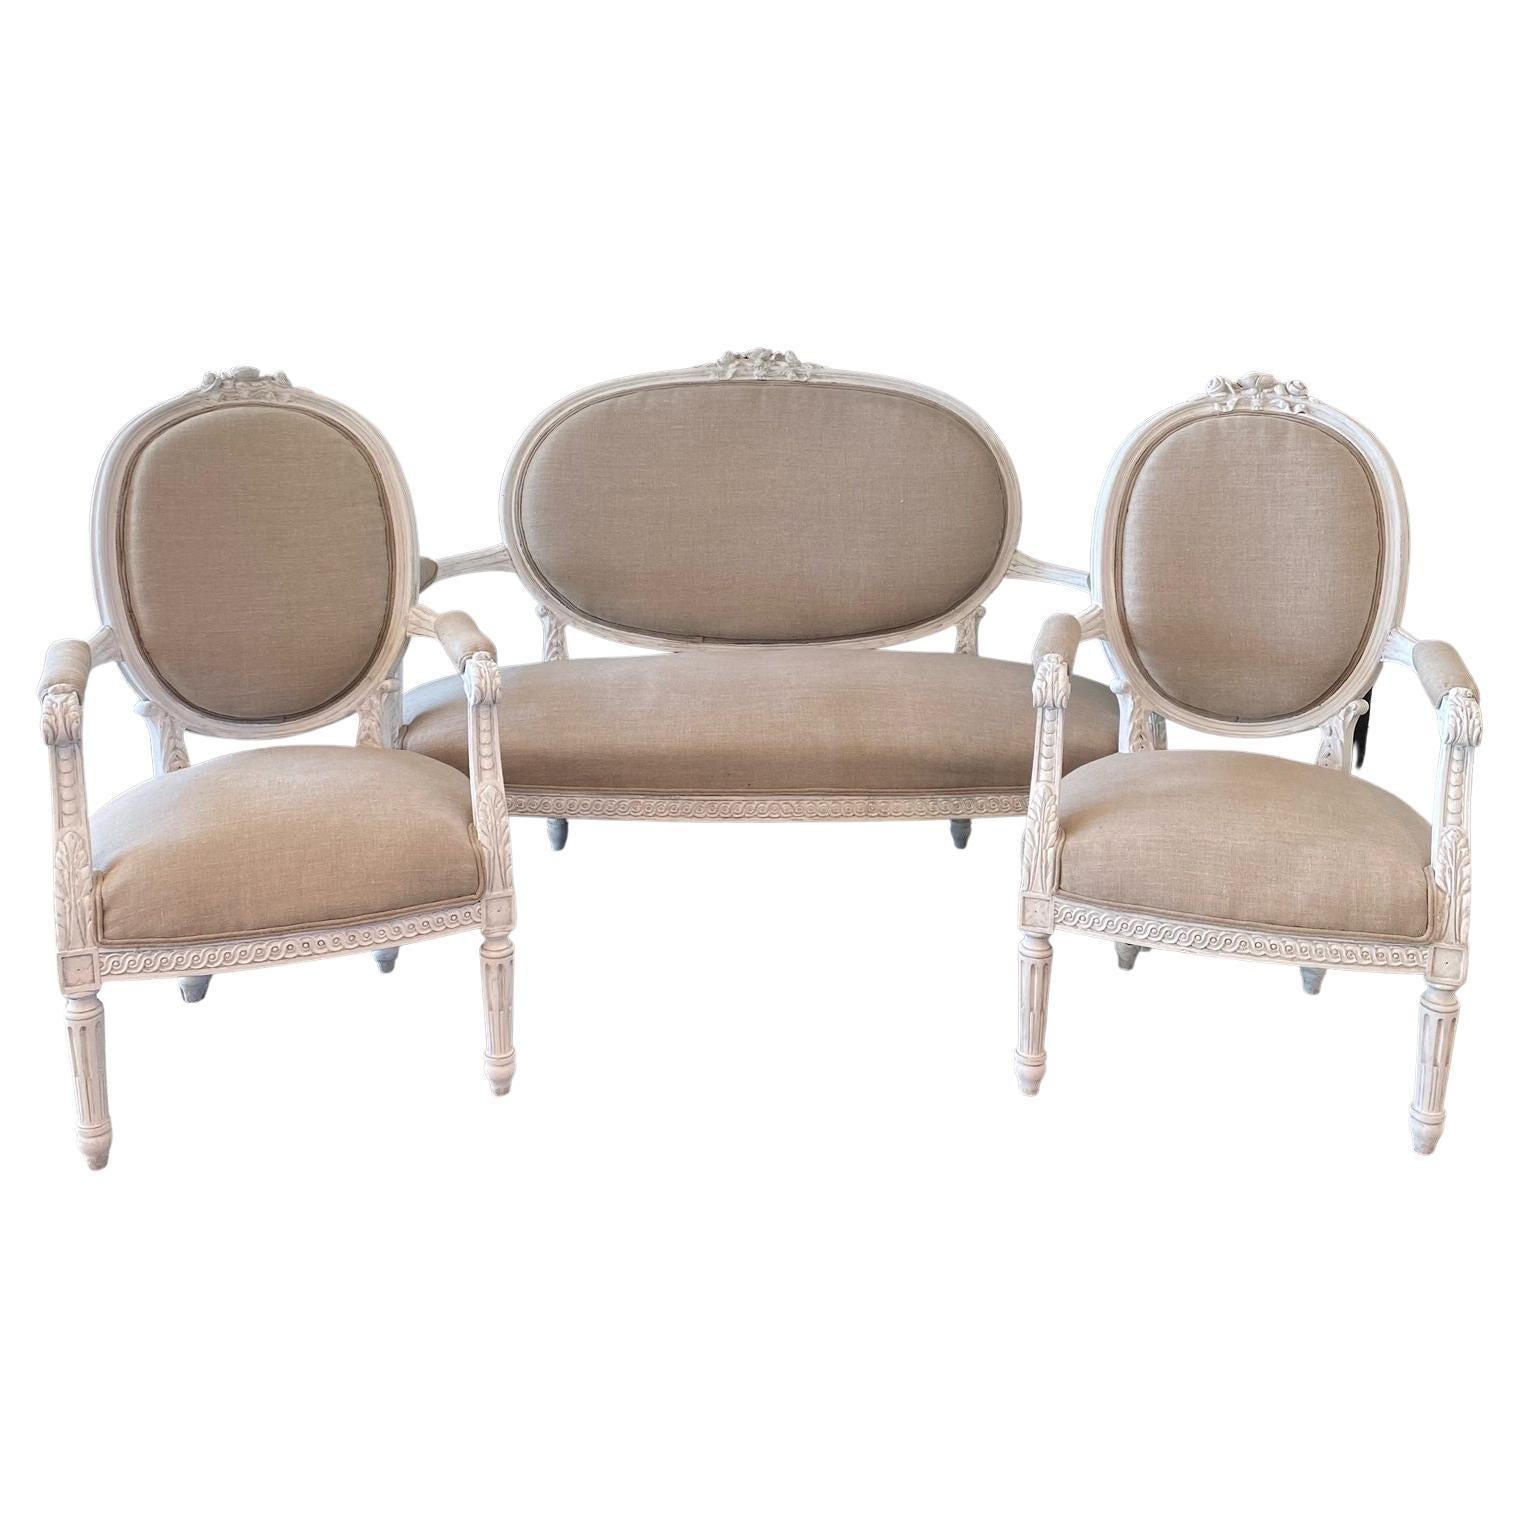 Lovely French Louis XVI Belle Epoque Parlor or Salon Set For Sale